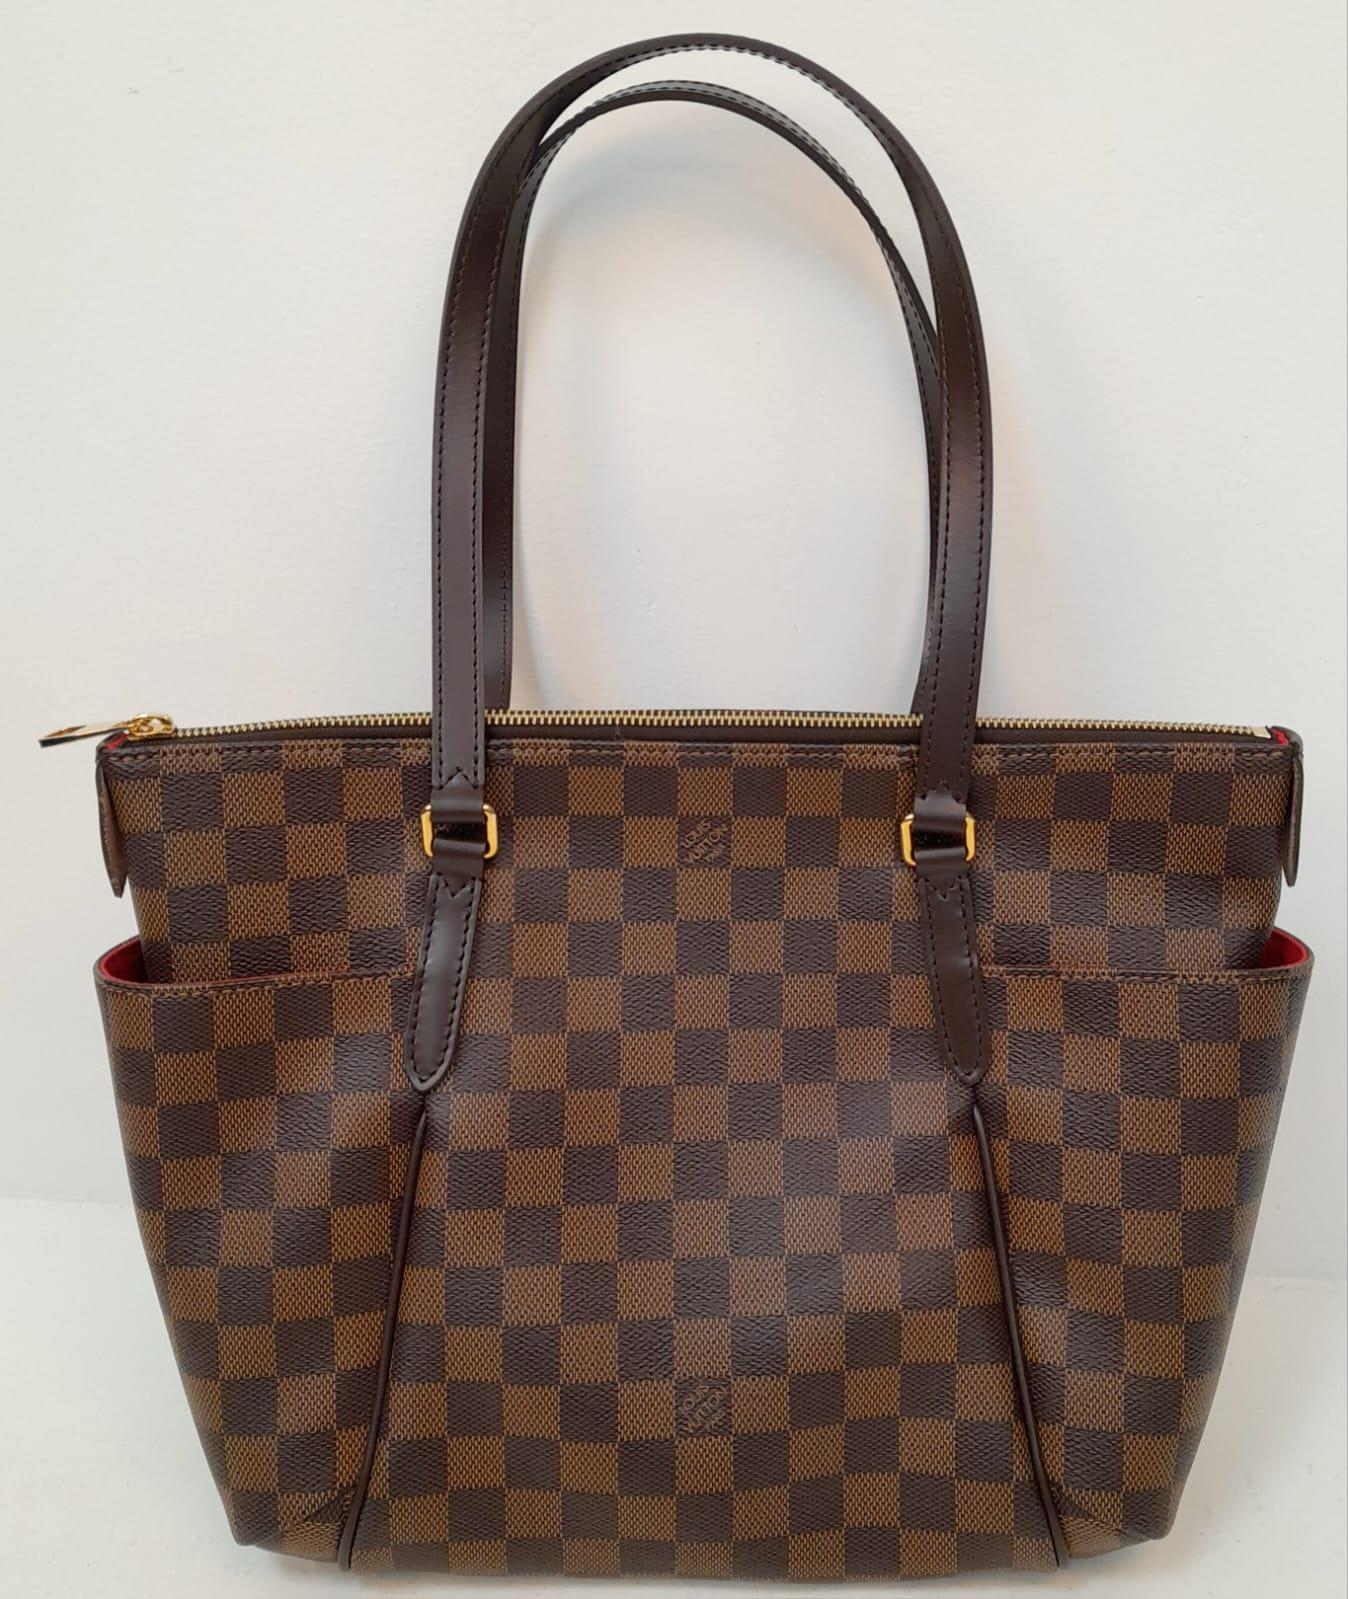 A Louis Vuitton Damier Ebene 'Totally PM' Shoulder Bag. Leather exterior with gold-toned hardware,